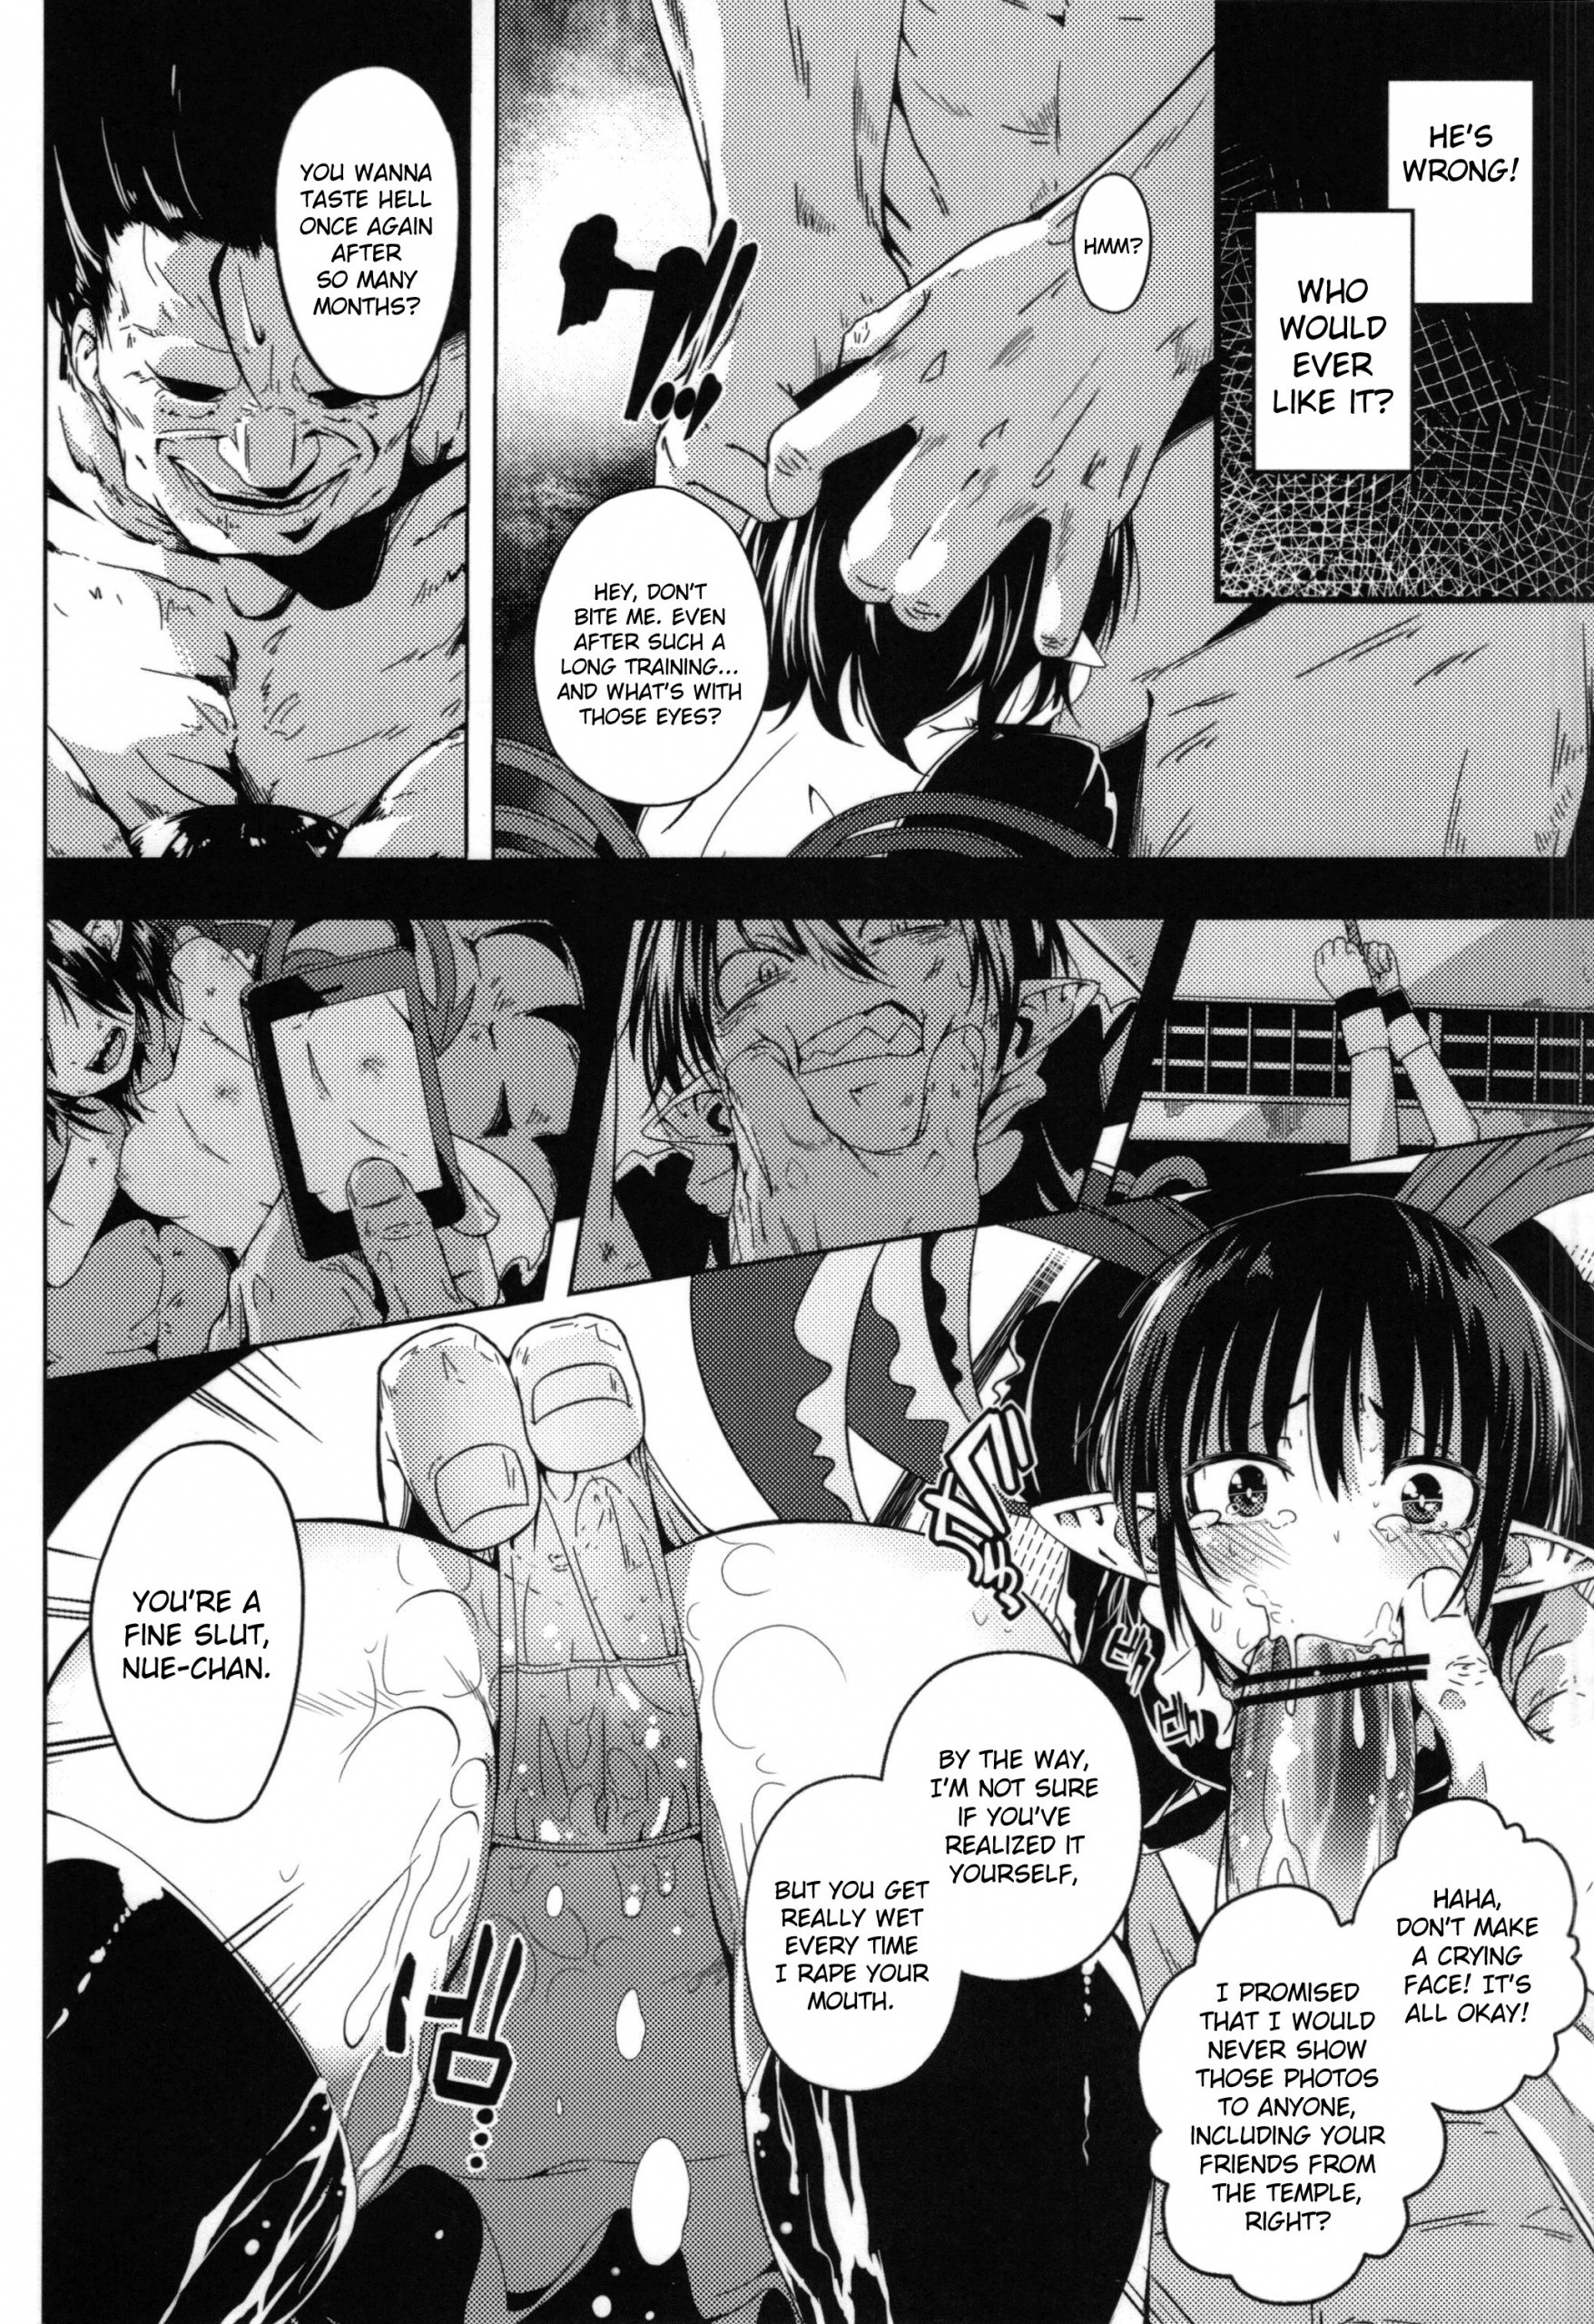 Her Mouth's Lover hentai manga picture 7